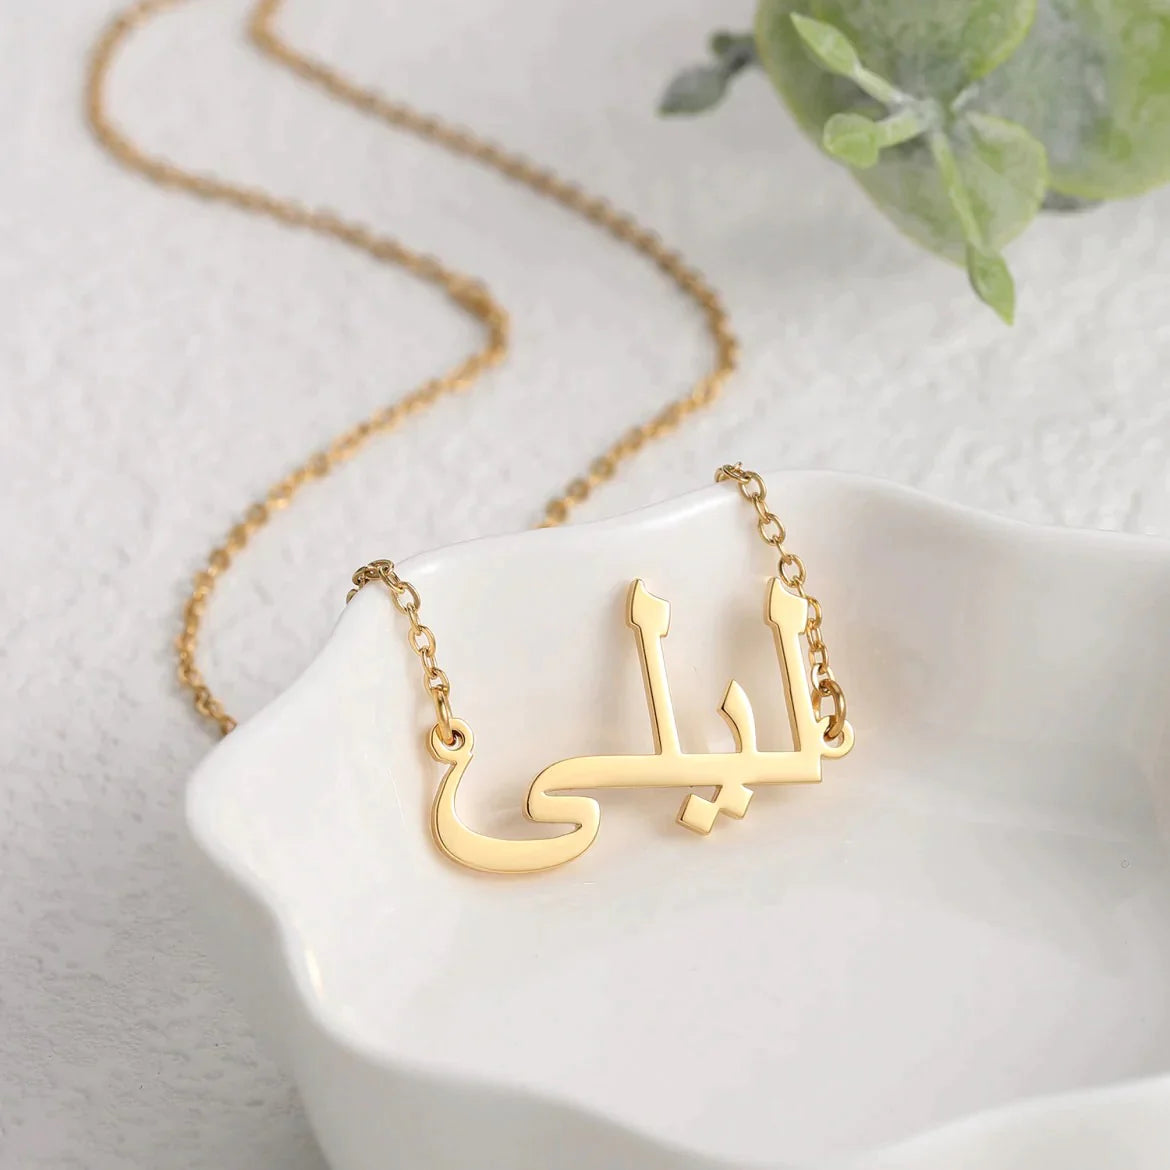 Arabic Necklace Custom Name Arabic Jewelry Personalized Arabic Calligraphy Name  Necklace Islamic Art Islamic Calligraphy Gift NH02 - Etsy